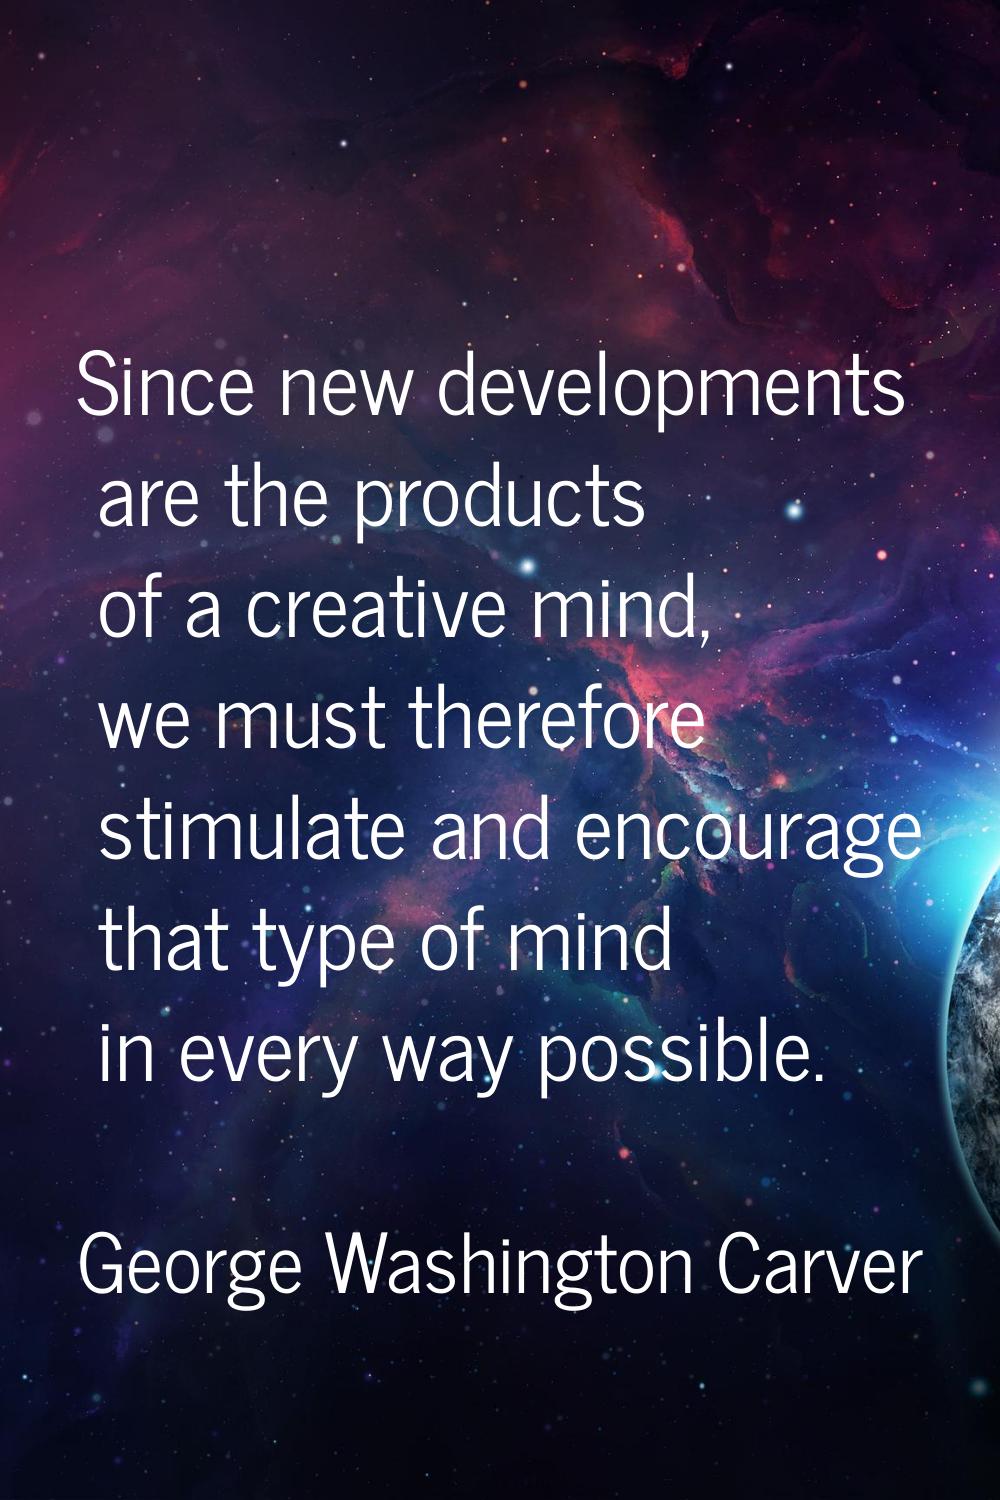 Since new developments are the products of a creative mind, we must therefore stimulate and encoura